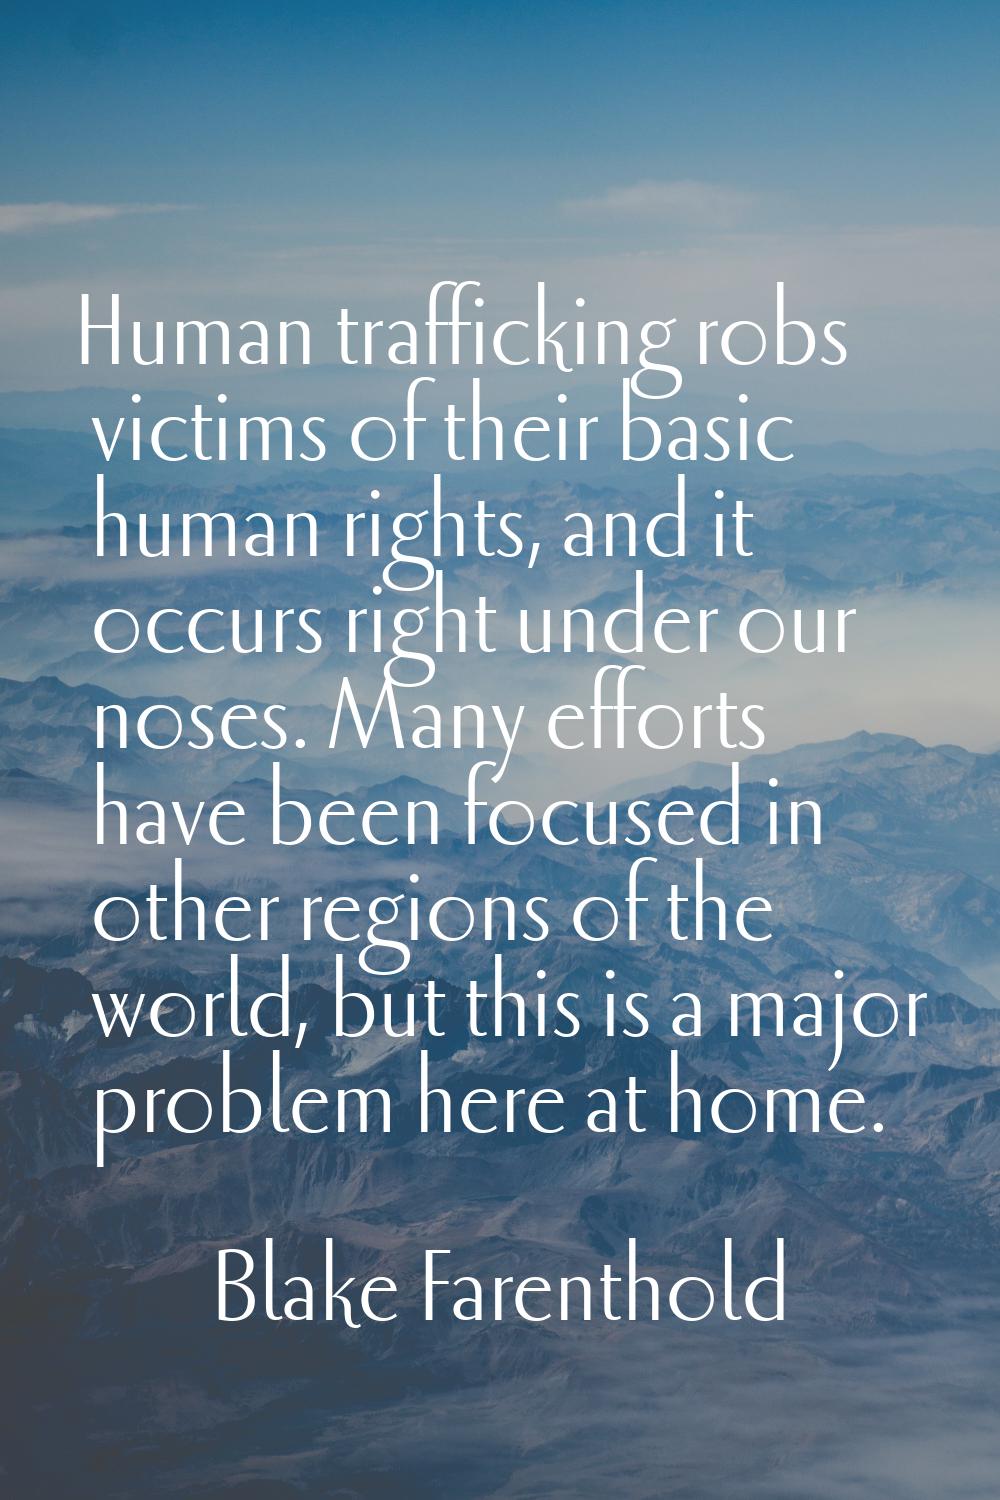 Human trafficking robs victims of their basic human rights, and it occurs right under our noses. Ma